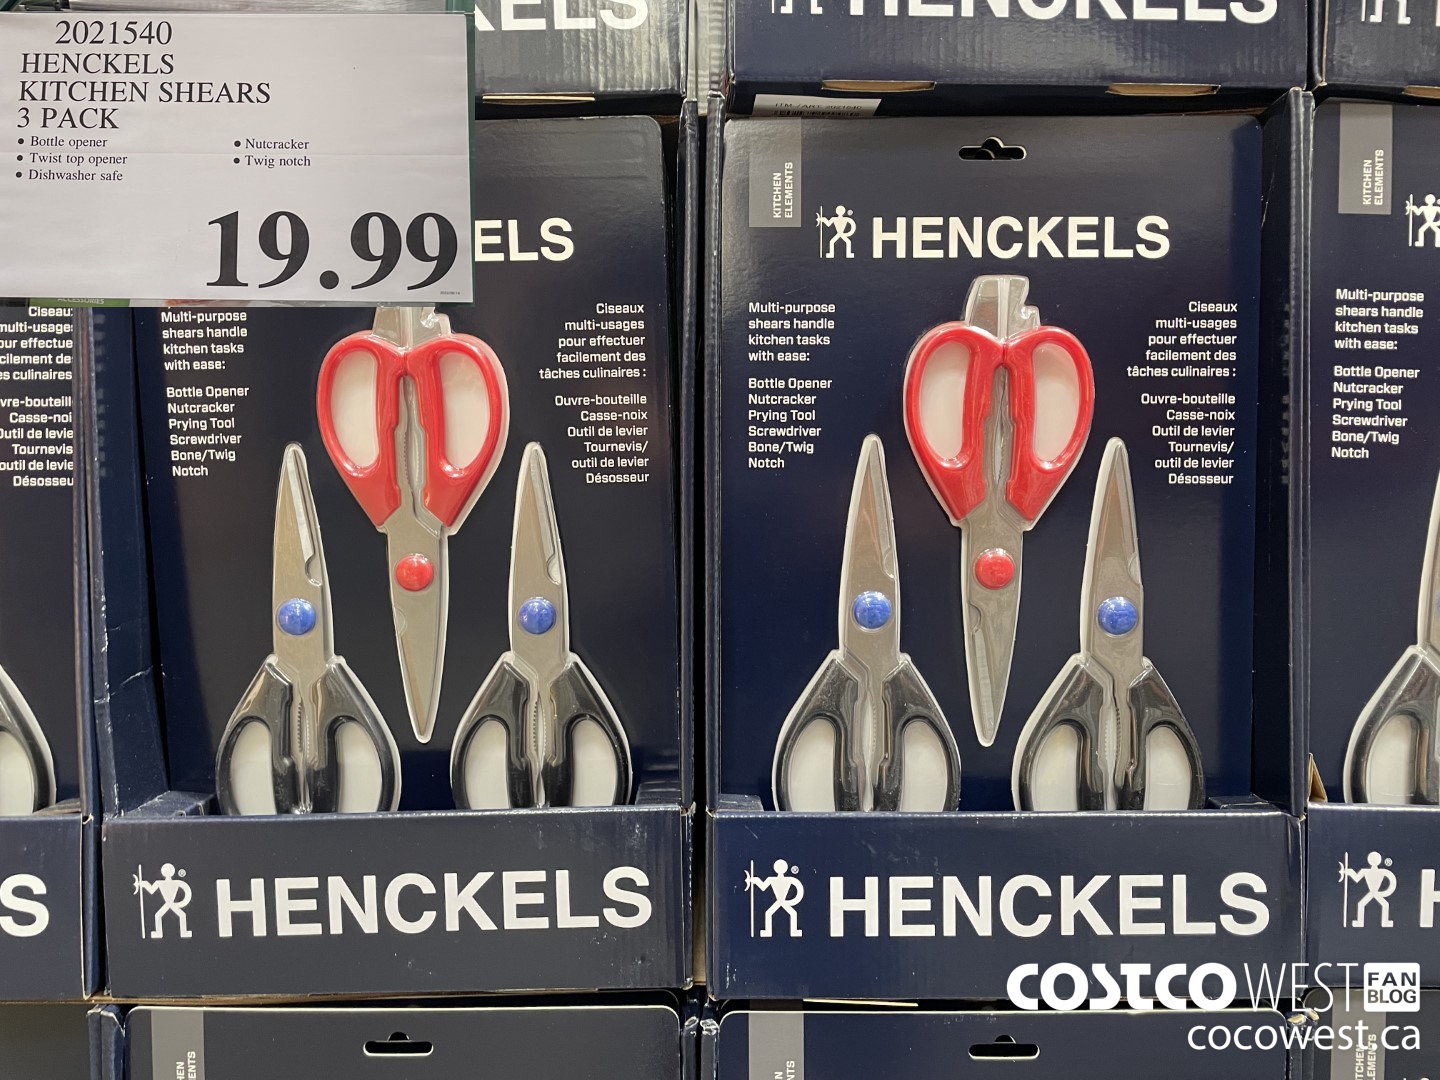 Costco] HENCKELS Multipurpose Detachable Kitchen Shears, 3-pack $29.99  (free shipping) - RedFlagDeals.com Forums